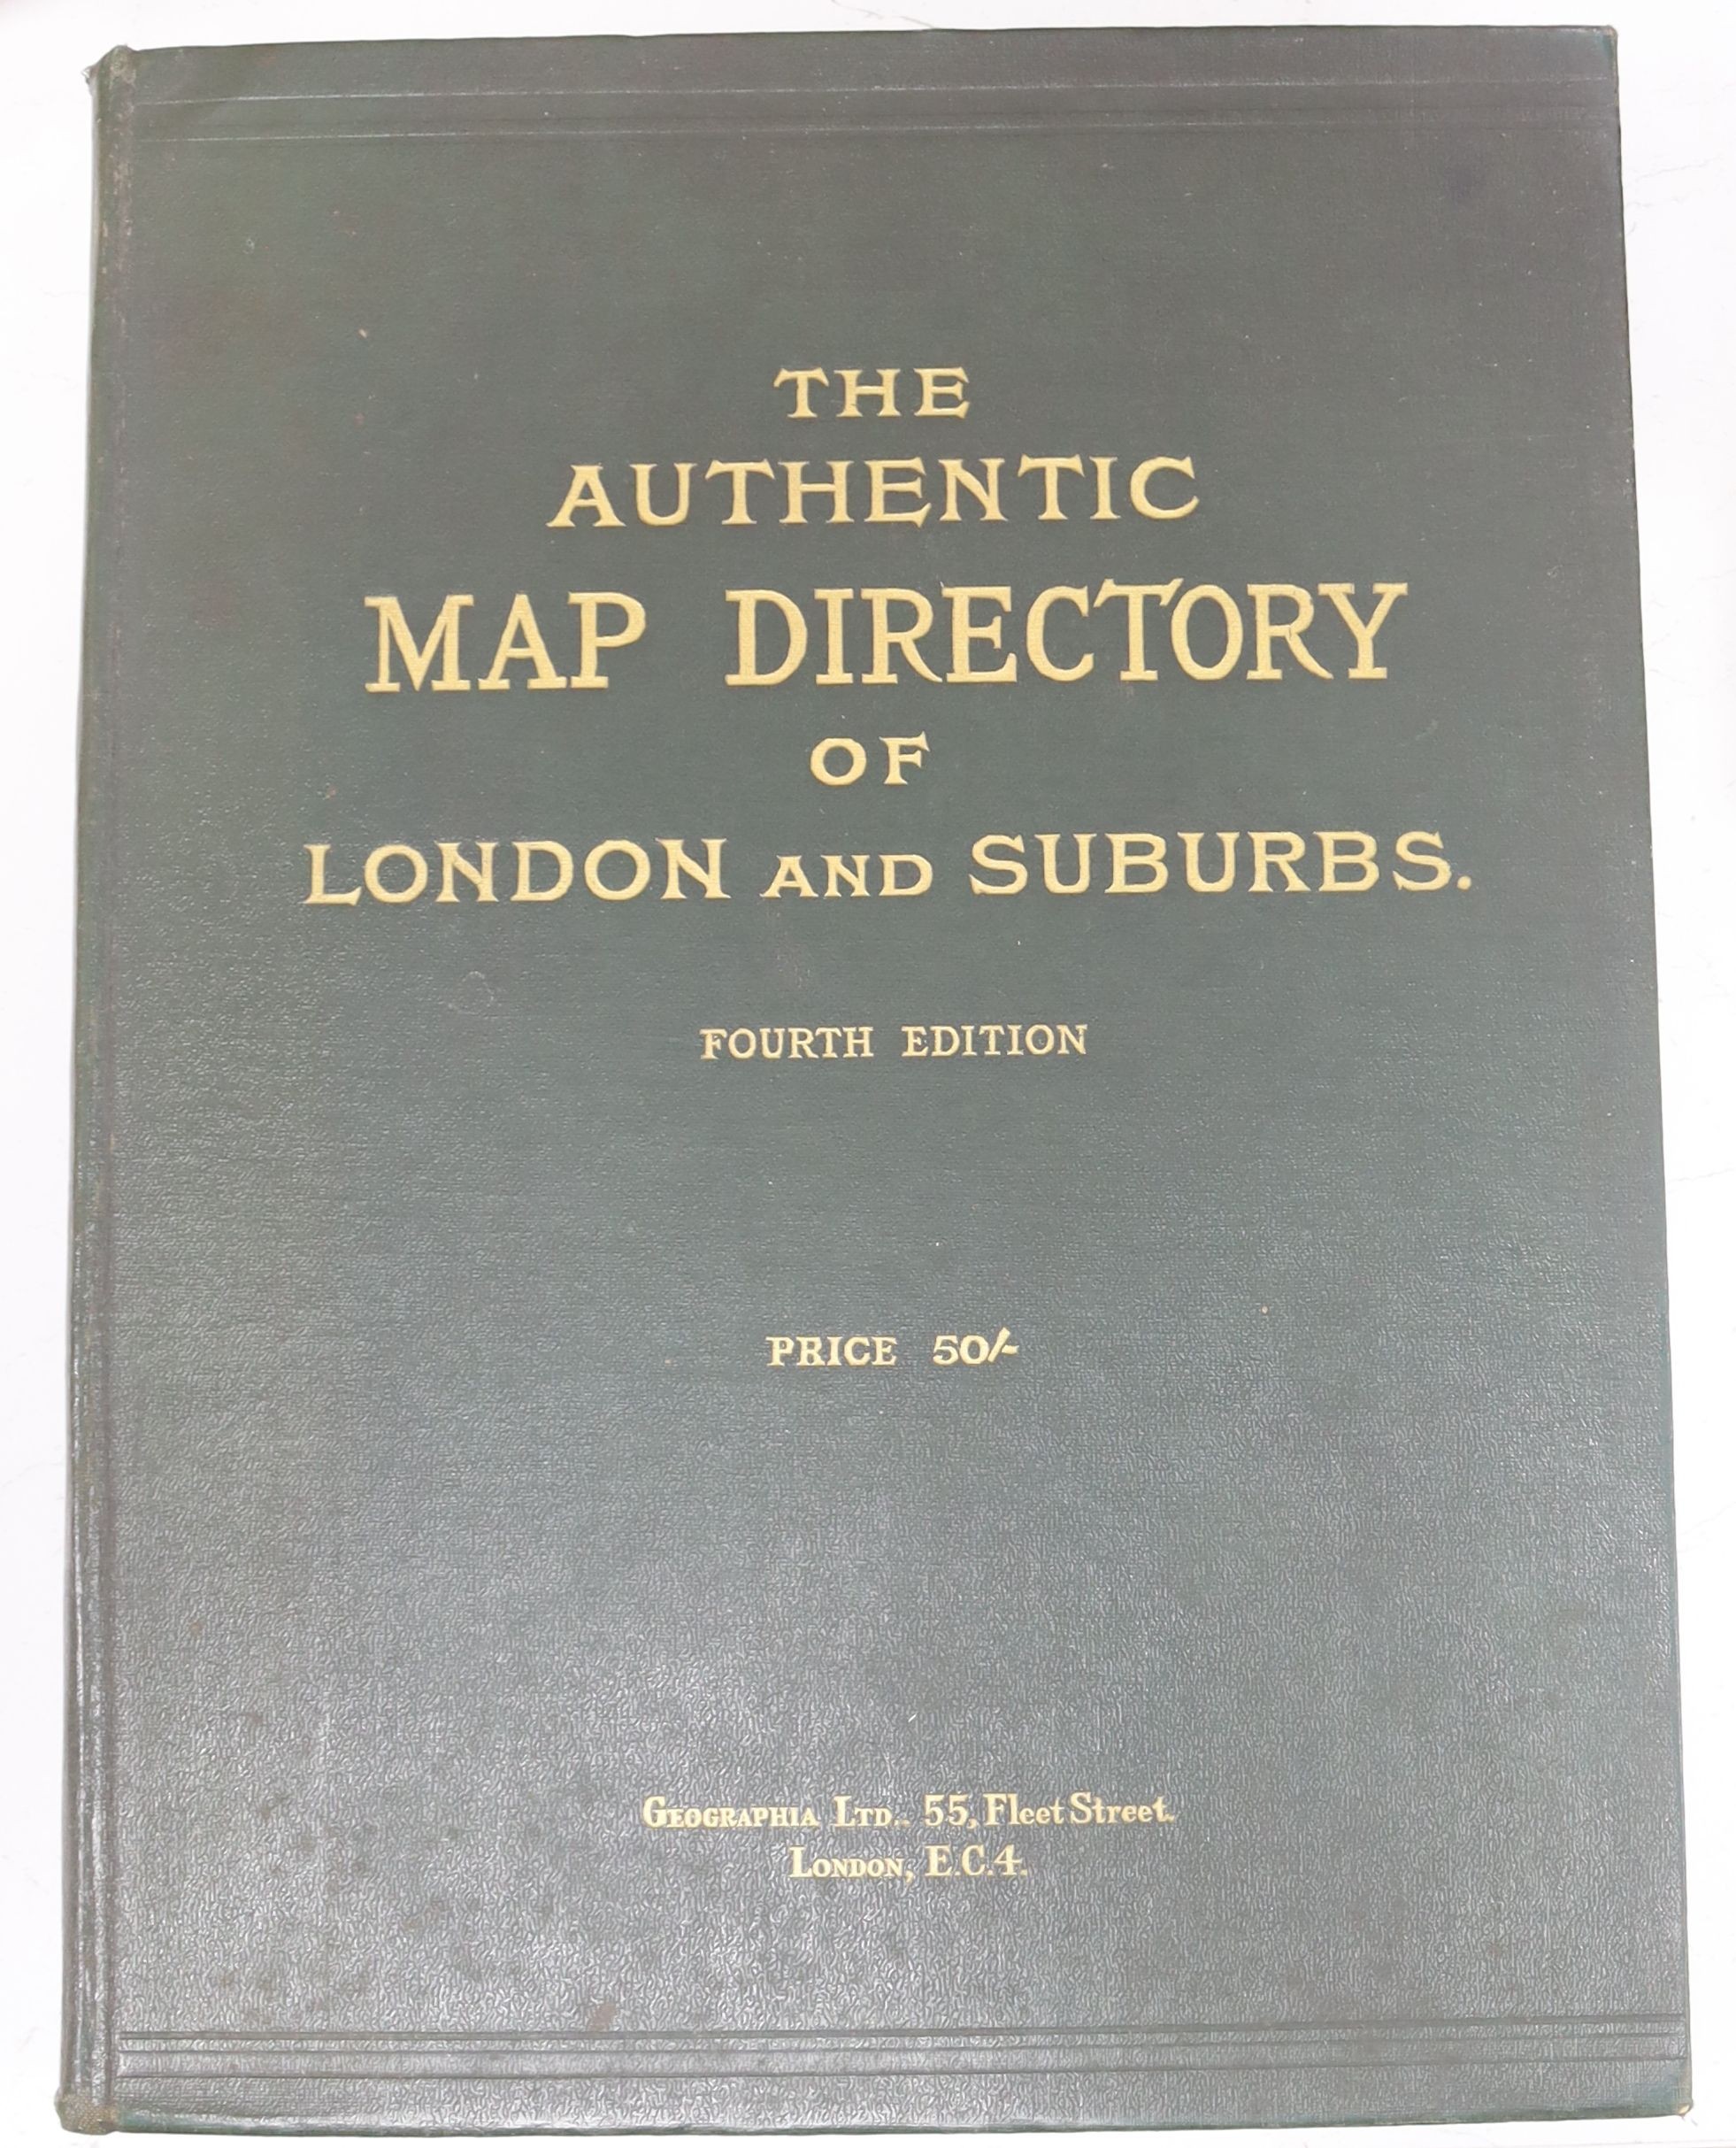 “The Authentic Map Directory of London Suburbs” 4th edition pub 1930 by Geographia blue cloth.